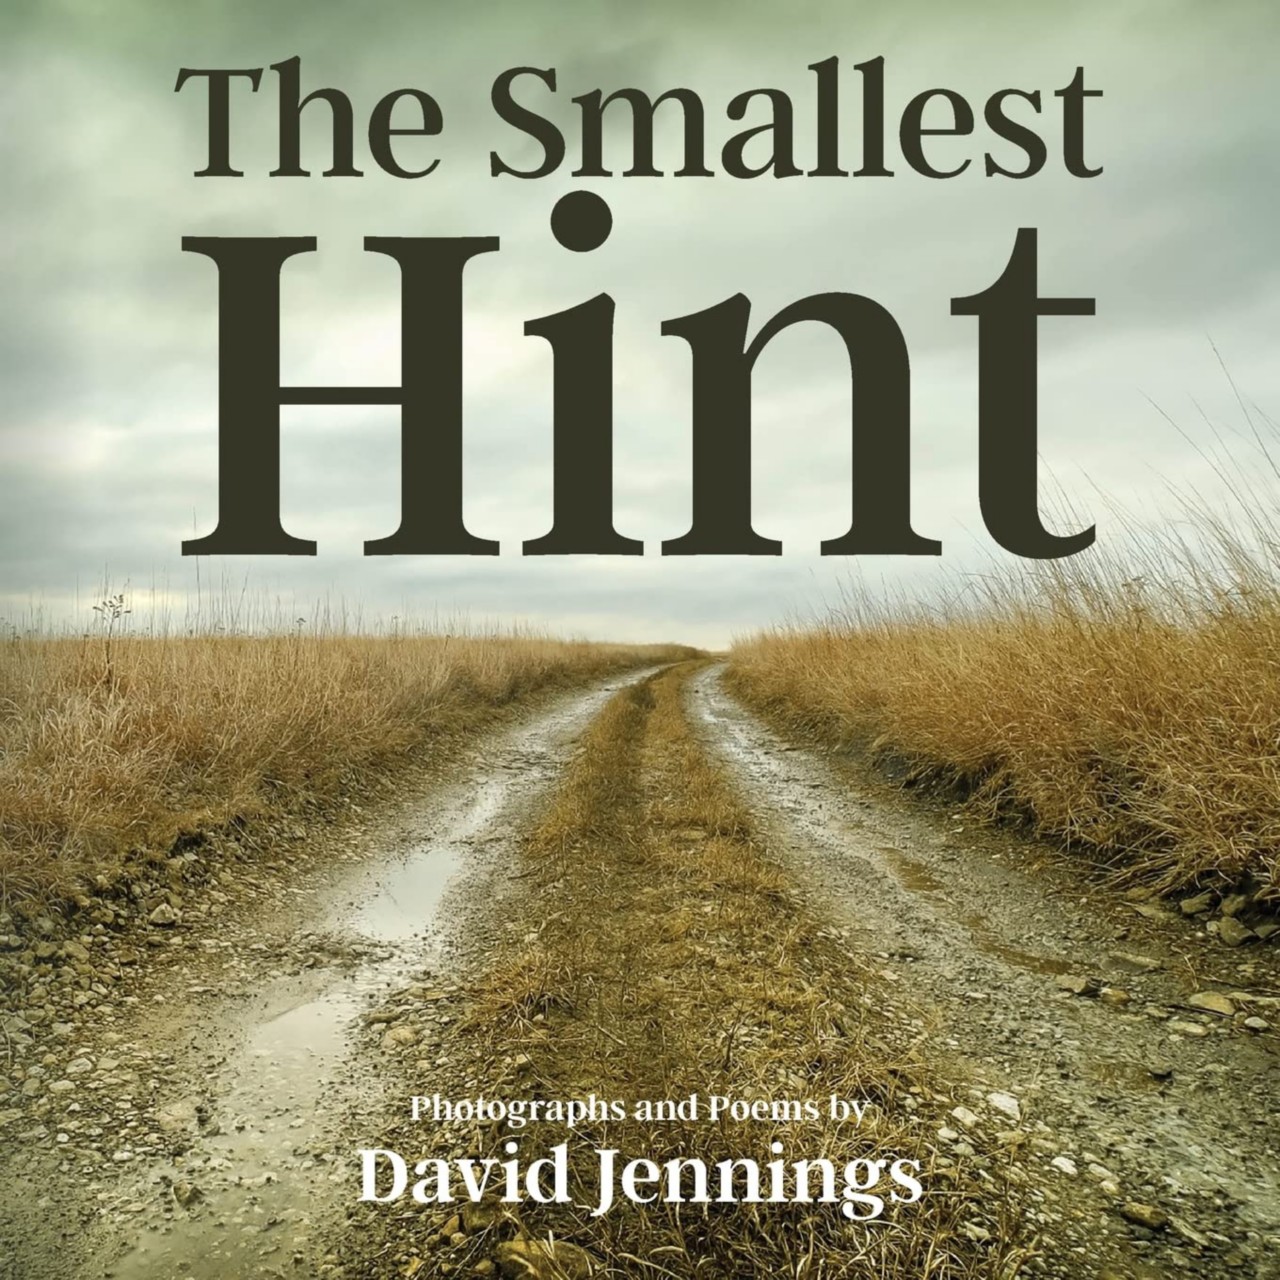 The Smallest Hint: Photographs and Poems photographs by David Jennings